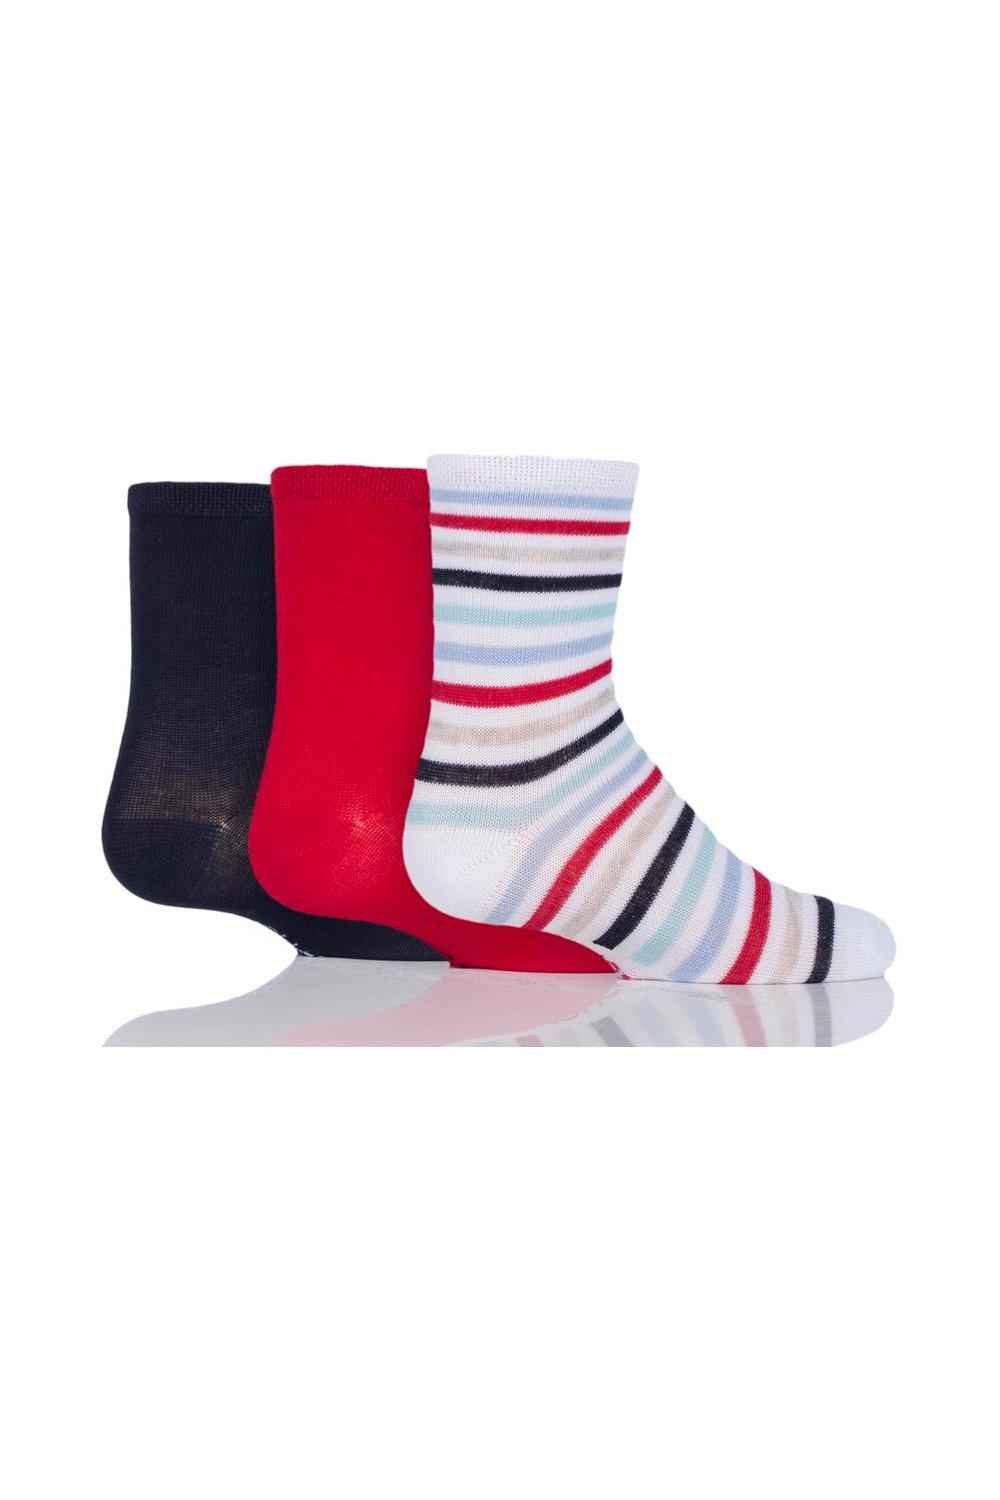 3 Pair Plain and Stripe Bamboo Socks with Smooth Toe Seams